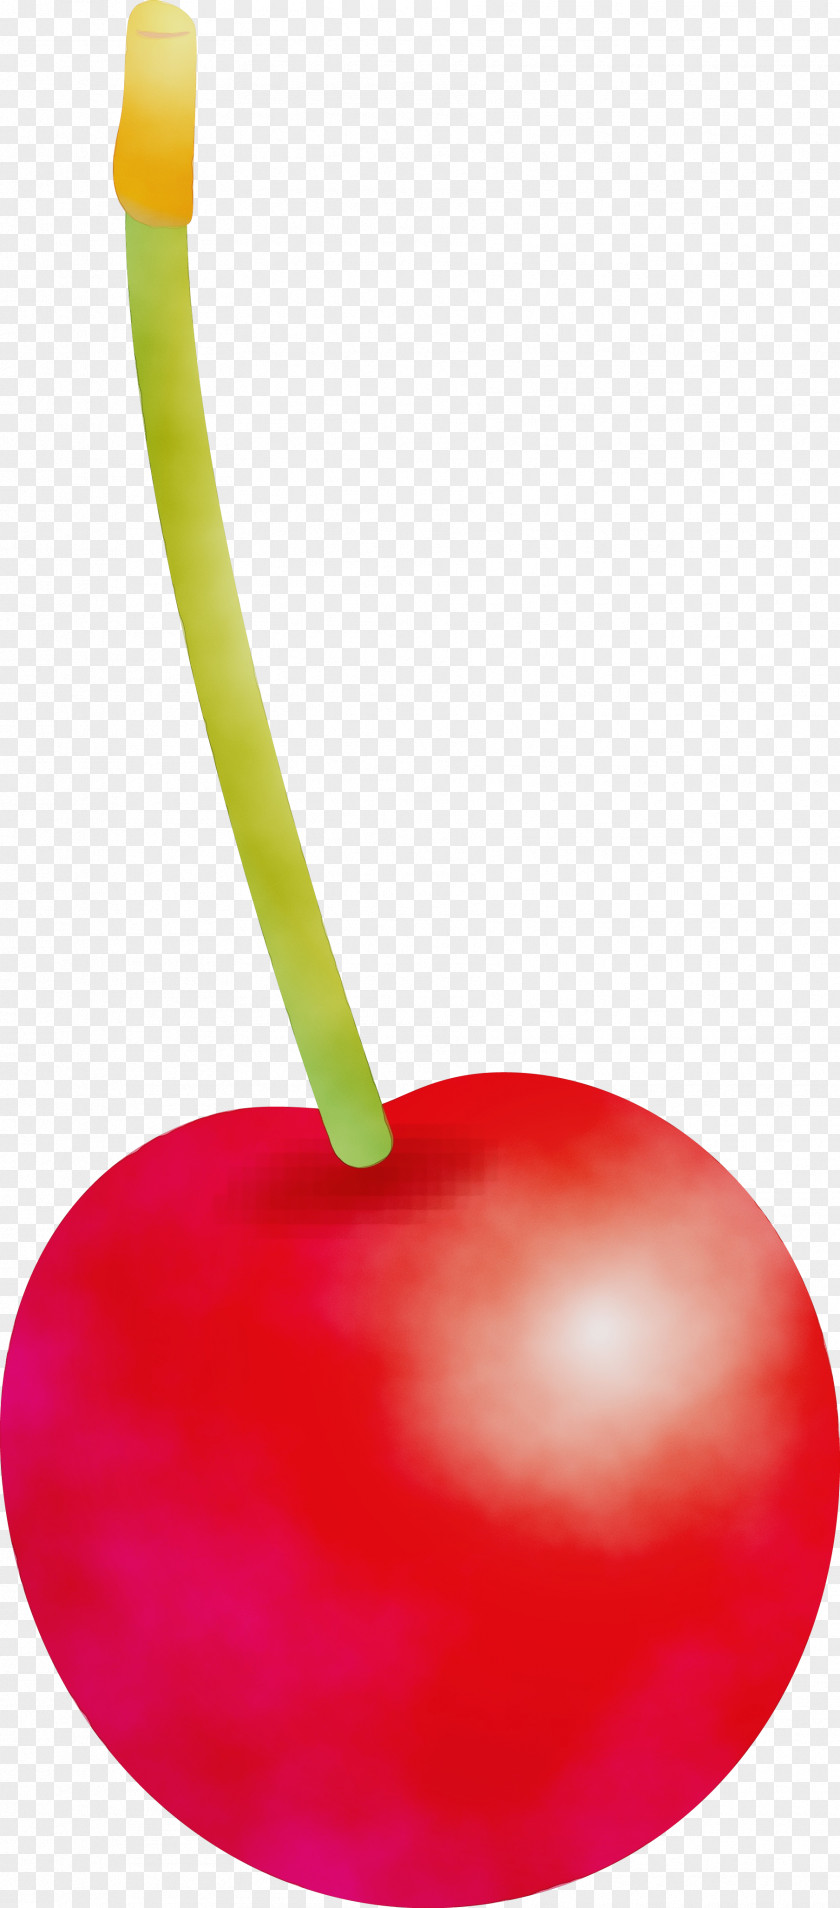 Cherry Fruit Plant Drupe Food PNG